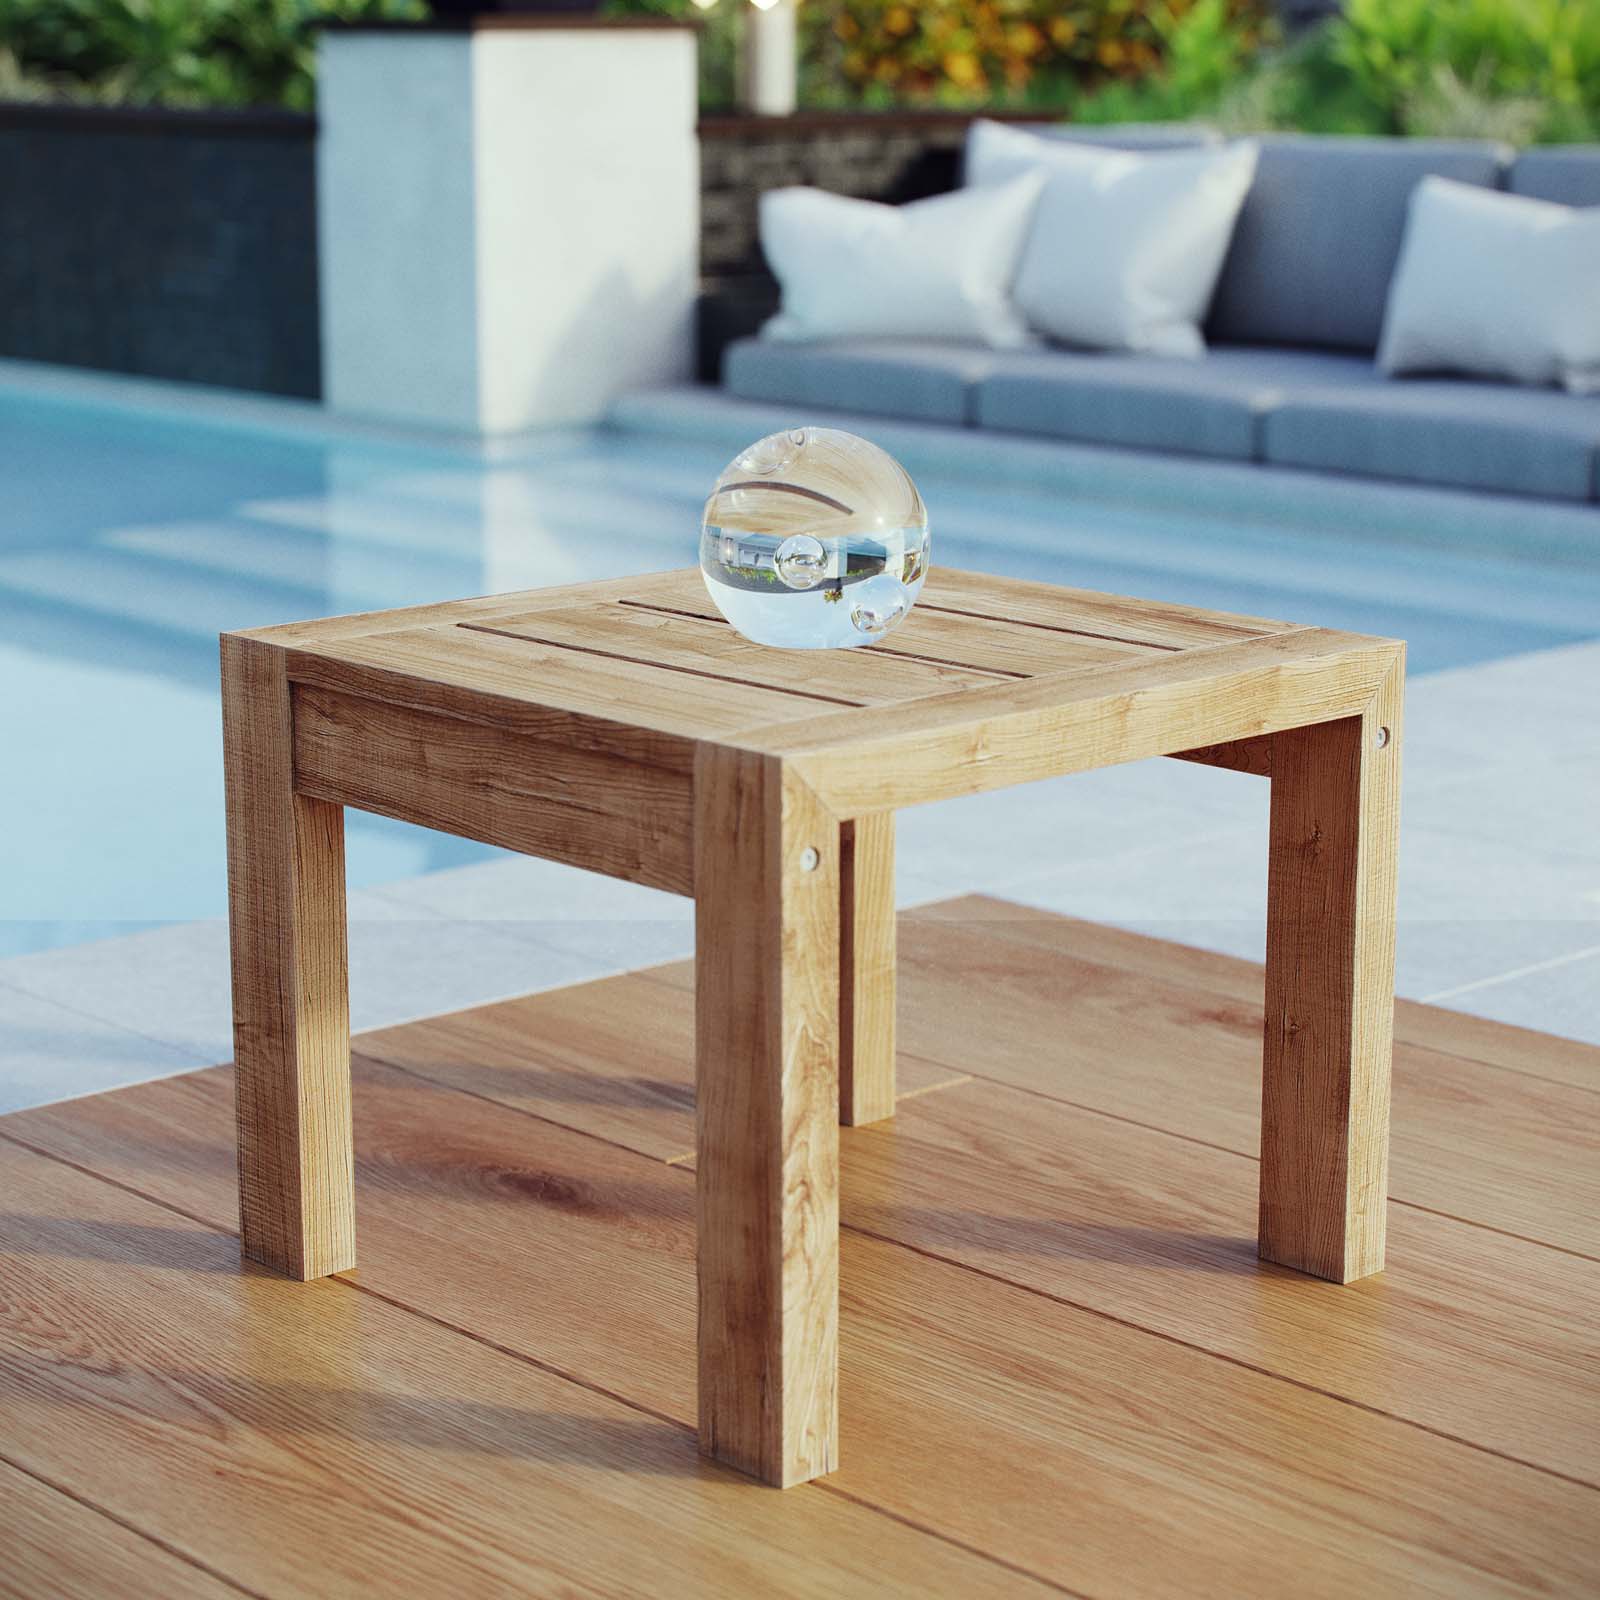 Modway - Upland Outdoor Patio Wood Side Table - EEI-2709